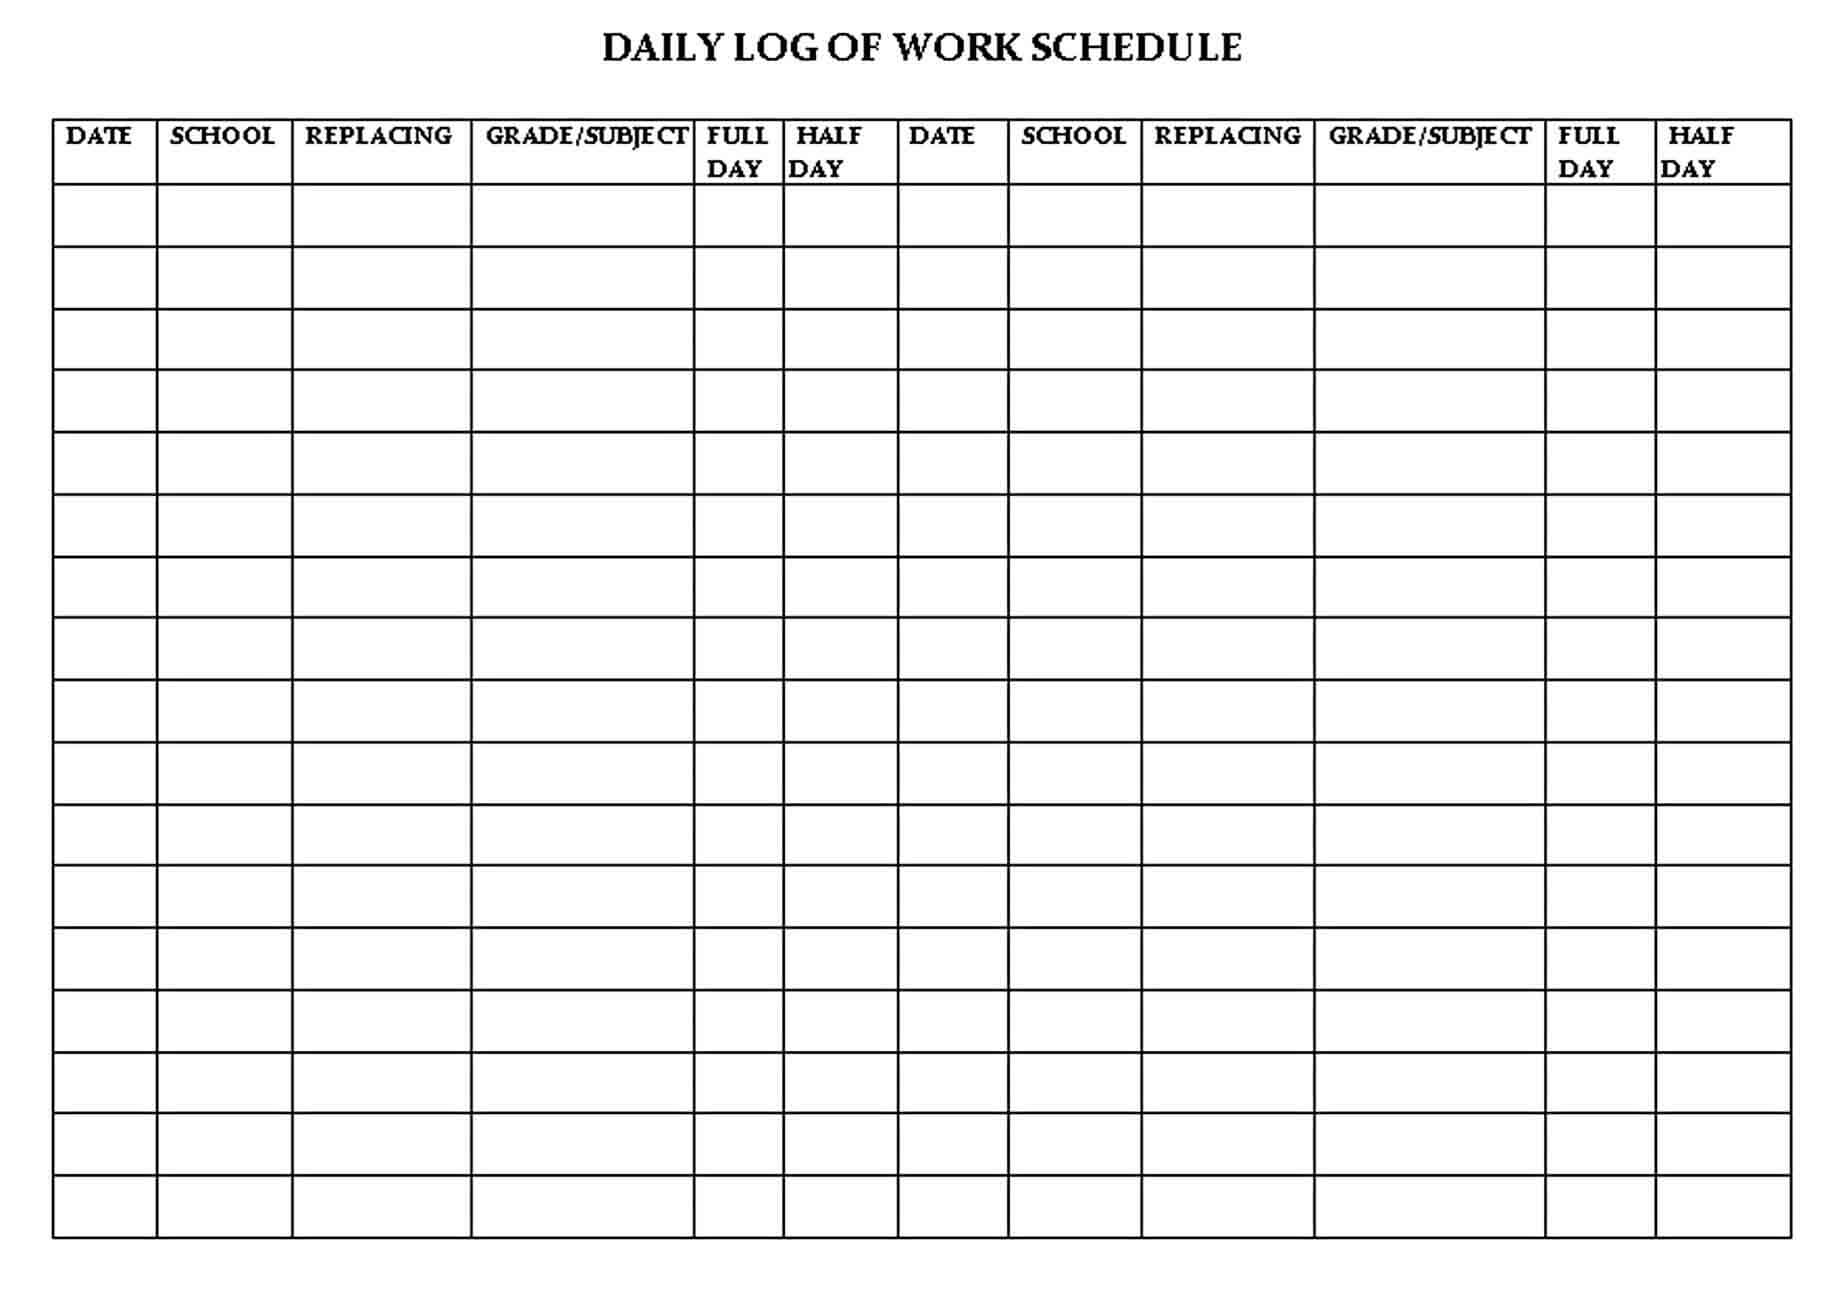 Daily Log of Work Schedule Template in PDF